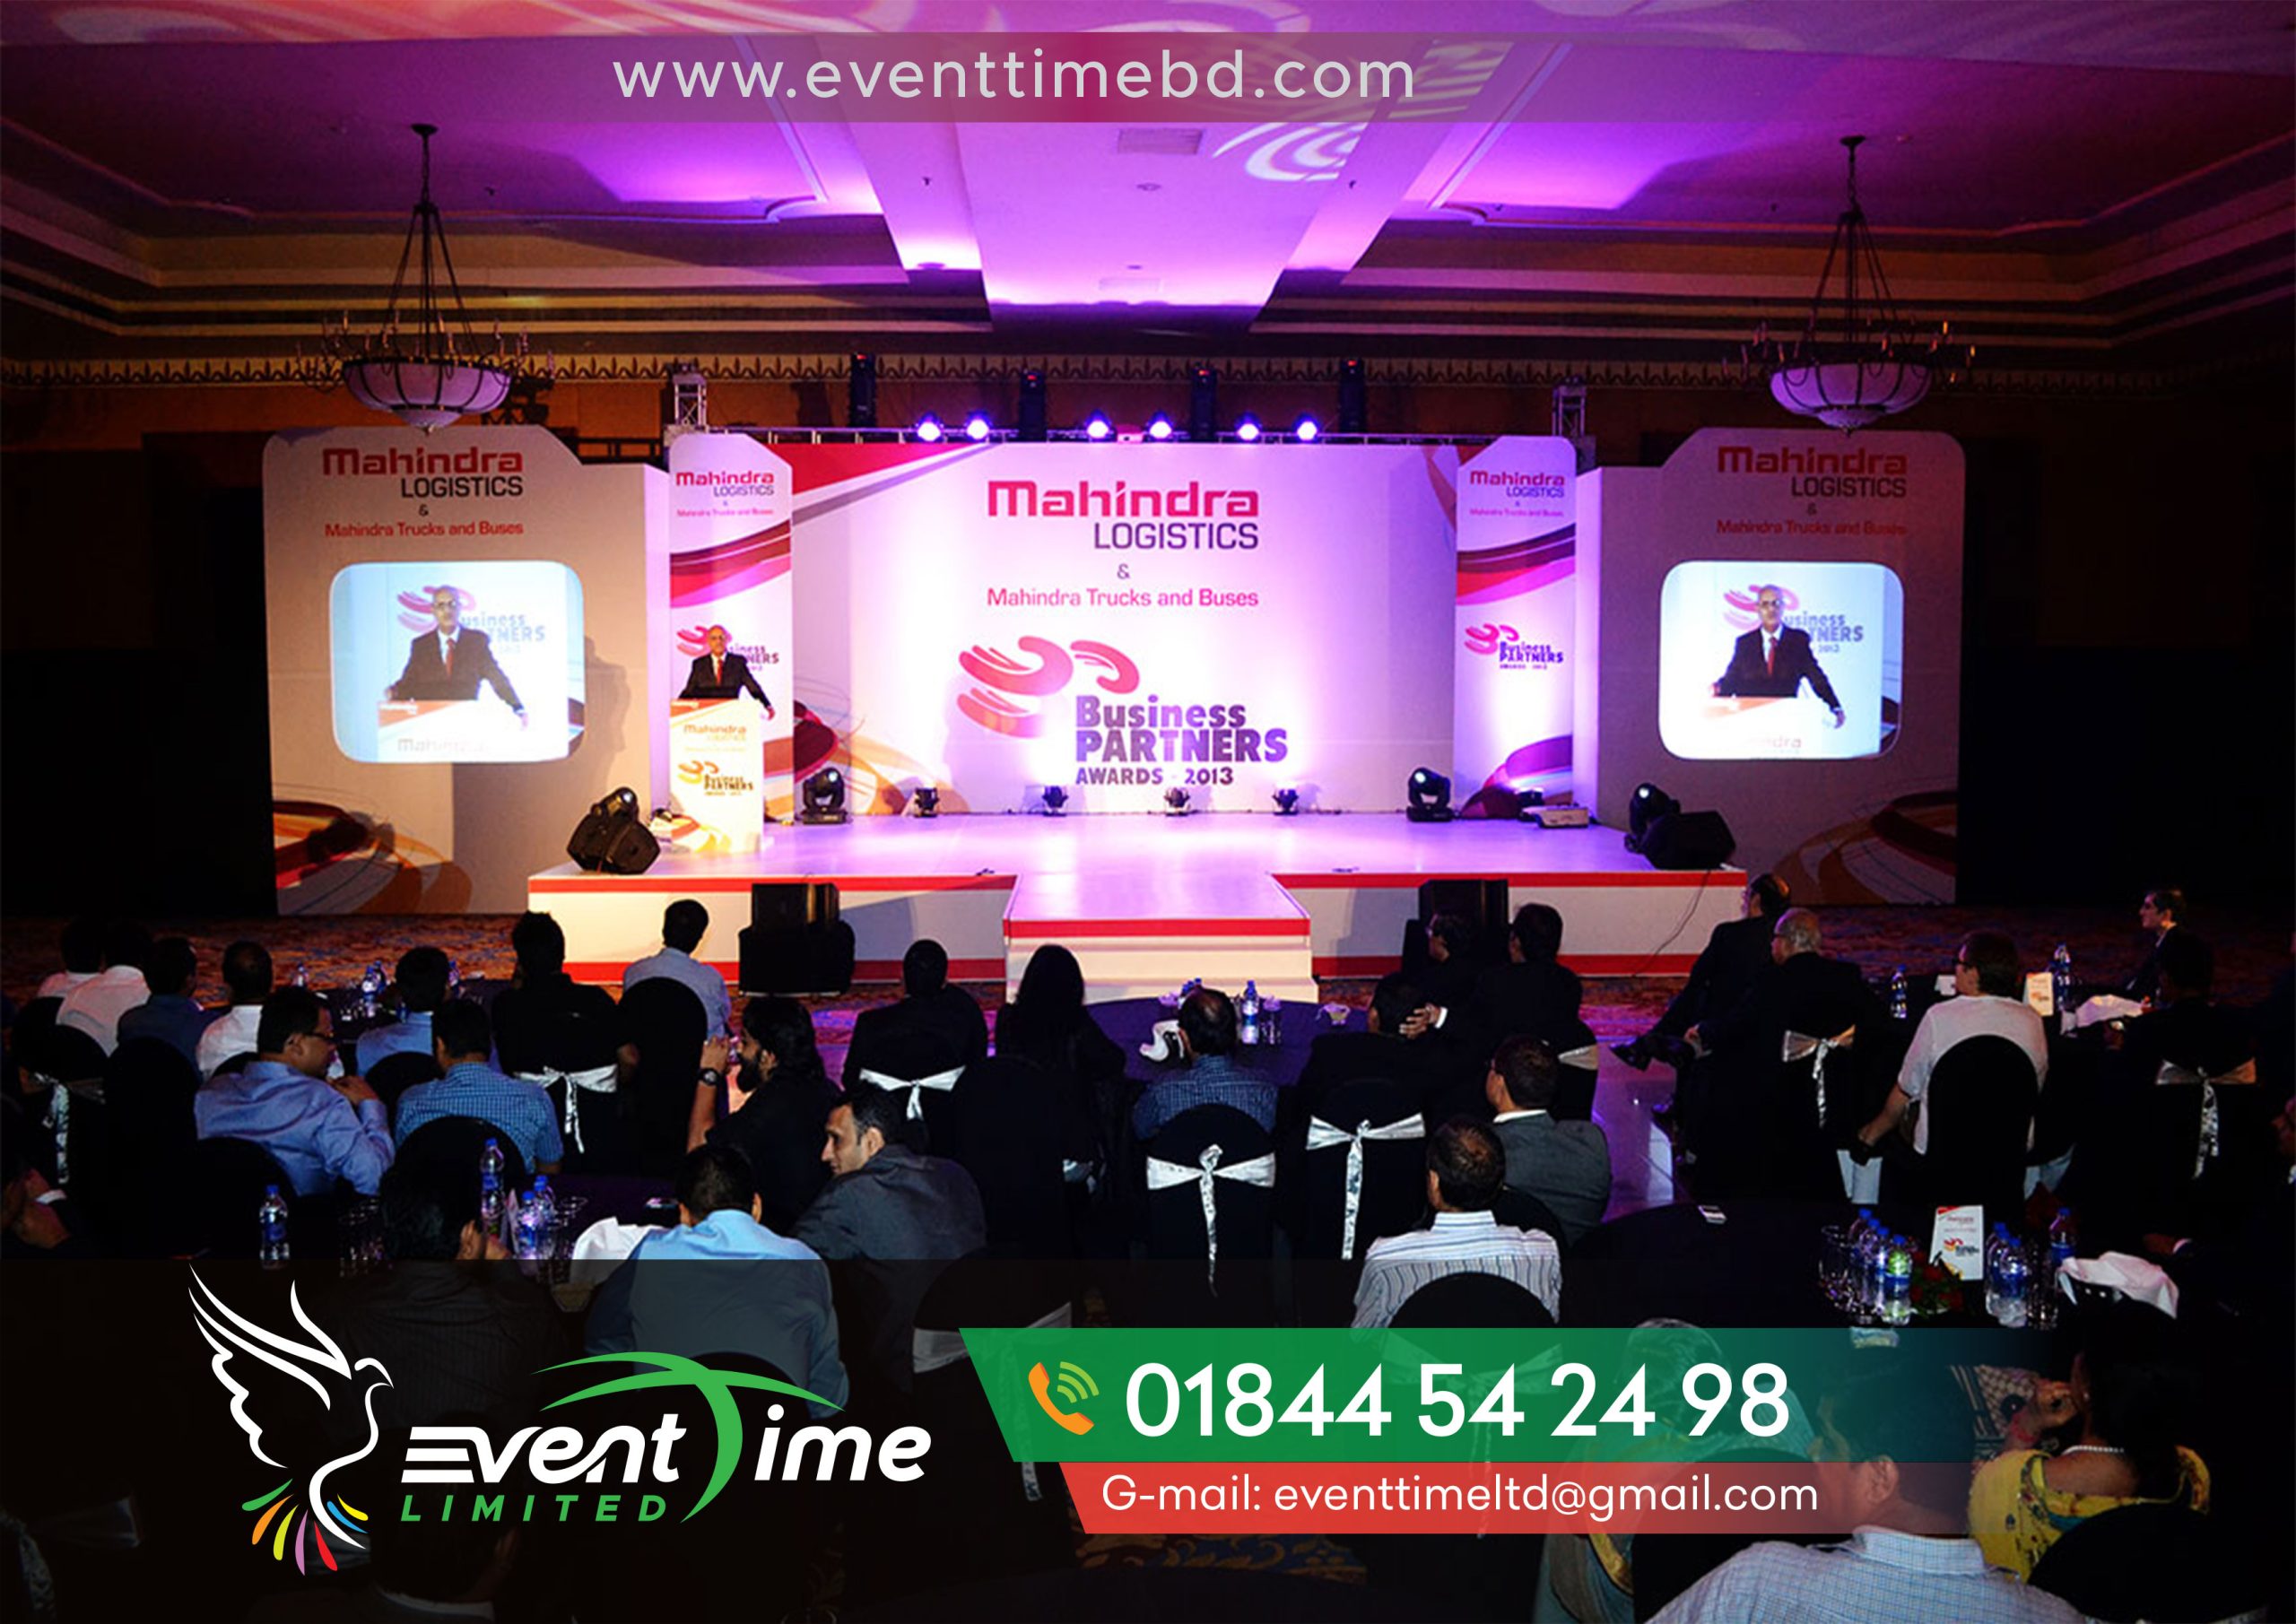 Best event management Companies in Bangladesh. corporate event. corporate bonding. event company. corporate meetings. meeting company. corporate party. corporate team building activities. best team building activities. corporate event planner. corporate event management. top event management companies. team building events. event planning companies. team events. company retreat. corporate retreat. corporate entertainment. company outing. company events. best companies to approach for sponsorship. company party. corporate team building. sponsorship event. corporate activities. corporate event catering. corporate event management companies. team building near me. company team building activities. team building companies. event production companies. the event company. company event. business retreat. event companies near me. corporate christmas party. unusual team building activities. event management companies near me. audio visual companies. corporate event entertainment. team building days. corporate dinner. virtual team building events. scavenger hunt team building. best event management companies. best corporate events. virtual corporate events. team building meeting. corporate event venue. corporate events near me. town hall meeting in company. best virtual team building activities. corporate day. team building outings. fun team events. corporate team building events. corporate days out. unique team building activities. hybrid team building activities. corporate meeting rooms. corporate event space. corporate meeting space. office outing. corporate event planning companies. corporate event companies. team building experiences. team building days out. internal events. top event planning companies. corporate away days. incentive events. corporate event production. corporate holiday party. corporate outing. offsite team building activities. event planning companies near me. corporate party entertainment. company annual dinner. corporate event organisers. fun corporate events. corporate team outing. top event management companies in world. corporate conference. corporate fun activities. office event. drumming team building. corporate event activities. team building retreats. outdoor activities for team building. treasure hunt team building. event decor company. business team building activities. summer team building activities. corporate sports events. corporate event locations. fun company events. outdoor corporate events. quick outdoor team building activities. team building locations. live event production companies. event organization company. corporate meeting planner. corporate offsite. top 50 event planning companies. corporate town hall meetings internal communication. corporate event decor. fun activities for corporate events. team building trips. corporate group activities. company anniversary celebration activities. corporate team events. corporate event services. corporate scavenger hunt. corporate event coordinator. corporate gathering. corporate picnic. company conference. corporate virtual events. corporate retreat packages. team building dinner. corporate breakfast. corporate hospitality events. csr meeting. theme for corporate events. event company website. team building seminar. corporate team activities. team away days. christmas party company. team building retreats near me. corporate team bonding activities. picnic companies near me. corporate sports day. new team building activities. corporate event packages. team building party. corporate venue. corporate meeting spaces near me. famous event management companies. fun company activities. international event management companies. corporate retreat activities. offsite team building. best event planning companies. new year team building activities. corporate events agency. best corporate team building activities. best event company. company picnics. company away days. company retreat activities. top golf team building. corporate event organizer. corporate meetings and events. company team building events. corporate entertainment service. corporate retreat planners. corporate activity days. corporate event spaces near me. best team building companies. company anniversary theme. event organising company. corporate fun days. big event management companies. corporate entertainer. corporate team building exercises. corporate event hall. corporate celebration. event staging companies. fun corporate team building activities. business team building. event entertainment companies. business event catering. event management company website. corporate event planners near me. corporate meeting rooms near me. corporate networking events. top event companies. interesting team building activities. corporate event locations near me. live event companies. team building agency. company luncheon. corporate treasure hunt. meeting planning companies. corporate event planning services. corporate live. summer corporate events. company picnic activities. company days out. fun activities for corporate employees. live production companies. team building activities for corporate employees. virtual event production companies. company event management. top 10 event management companies in world. corporate event management services. the best team building activities. outdoor team building activities for small groups. corporate party activities. company group activities. indoor corporate team building activities. corporate cocktail party. corporate event marketing. top corporate event planning companies. banquet halls for corporate events. corporate 5k. main event corporate office. the team building company. fun team building events. outdoor team building events. corporate team building companies. corporate meeting venue. virtual team building companies. indoor team building events. best team building events. cool team building activities. murder mystery corporate event. christmas corporate events. corporate event planning packages prices. corporate dinner activities. company outing trip. corporate social events. conference management companies. virtual company events. scavenger hunt company. amazing race corporate team building. top event production companies. corporate party venue. outdoor team building activities near me. team building companies near me. corporate meeting management. laser tag team building. evening entertainment for corporate events. sports hospitality companies. corporate summer party. special corporate events. hybrid team building. indoor corporate events. escape team building. company year end party. destination management company. event management. strategic meetings management. event planning. event management companies. event management business. wedding event management. event designing. event organisers. event company. event management website. event coordination. decoration event management. event management near me. event management services. wedding management. meetings management. marriage event management. birthday event management. event management business plan. event planner near me. corporate event management. event management platform. managers meeting. corporate event planners. event management agency. top event management companies. best event management. event planning 101. creative event management. event planning companies. management events. event agency. certified event planner. southern event management. corporate event management companies. event organizer company. sports event management. us event management. event management plan. event planning website. event planning and management. event management companies near me. perfect event. event management itil. event operations. birthday event management near me. conference management. virtual event management. rims conference. best event management companies. event consultant. event company near me. pmi conference. successful event planning. cvent event management. birthday event planners. 5cs of event management. sustainable event management. corporate event planning companies. exhibition management. famous event planners. special events management. event management team. birthday party event management. management fest. top event planning companies. event management sites. festival management. birthday event organisers. conference event management. hospitality event. corporate events companies. event planning companies near me. corporate event organisers. meeting room management. pmi conference 2023. party management. it event management. event planning agency. top event management companies in world. event organizer website. fair management. event management group. conference room management. sports event management companies. conference registration platforms. birthday decoration event management. marriage event management near me. top 50 event planning companies. catering and event planning. a to z event management. convention management. concert event management. event arrangement. hfma annual conference 2023. birthday decoration event management near me. wedding management companies. event security management. virtual event agency. hfma conference 2023. bliss event management. topline event management. concert management. 5c of event management. catering and event management. wedding event planner near me. event planning platform. best event management platforms. event company website. advanced event management. special event coordinator. sustainable event planning. registration platforms. hybrid event management. event management portfolio. sports event coordinator. event management marketing. sports event planner. need of event management. event registration management. party event management. event organisers for birthday party. destination management services. sports and event management. famous event management companies. exhibition event management. event management for birthday party near me. best event planning companies. shadi event management. music event management. event planning packages. manage my wedding. best event company. hotel event management. aura event management. event organizer business plan. meeting and event planning. pre event planning. marriage event management cost. music event management companies. corporate event organizer. corporate event agency. pr and event management. festival event management. sports event organisers. integrated events management. event booking platform. costing in event management. event organising company. activities in event management. big event management companies. digital event management. celebrity event management. sapphire event management. green event management. end to end event management. event planning organizations. event operations coordinator. event management company website. sales and events coordinator. event in itil. event management services packages. corporate event planners near me. creative event organizers. top event companies. event management firms. birthday celebration event management. event planning sites. dreamz event management. strategic event management. event management organisation. garnish event management. festival event management plan. 360 event management. celebrity event planners. professional event management. virtual event management companies. conference and event organiser. event management slideshare. event management after 12th. event planning team. celebration event management. conference and event management. itil event. event management and marketing. public relations in event management. company event management. event management tasks. top 10 event management companies in world. corporate event management services. event management saas. event planning portfolio. best event planner near me. successful event management. sport event organizer. business plan for event management company. concert management companies. event management packages. top destination management companies. convention and event management. risk in event management. hospitality in event management. luxury event management. wedding event management near me. event management and catering services. azure event management. strategic event planning. party event organisers. top corporate event planning companies. event management organization. odoo event management. unique event management. shadow event management. birthday party decorations event organizers. catering event management. encanta event management. rims conference 2023. event coordinator near me. management fest events. event marketing near me. gojo event management. event traffic management. global exhibit management. conference management companies. apa itu event management. pre event activities in event management. tutons event management company. top event production companies. corporate meeting management. pra destination management. facilities management conference. basileia events management. product launch event management. evergreen event management. crowd management in event management. roadshow management. csc crowd management. conference planning companies. event management companies. epson event manager. event management. epson event manager software. event management company. event manager. event management software. events management. events manager. event management jobs. event manager jobs. event manager salary. security information and event management. facebook events manager. manage events. event management system. events management companies. events manager jobs. corporate event management. event manager job description. event manager software. event management degree. event management platform. event management services. event management softwares. event manager resume. events management software. best event management software. companies of event management. epson software event manager. event management certification. event management solutions. event management tools. event managment. event managment software. event marketing manager. event sales manager. facebook event manager. southern event management. us event management. corporate event management companies. epson event manager download. epson event manager software et-3760. event management app. event manager job. events management jobs. virtual event management. what is event management. best event management companies. epson event manager software wf-2850.